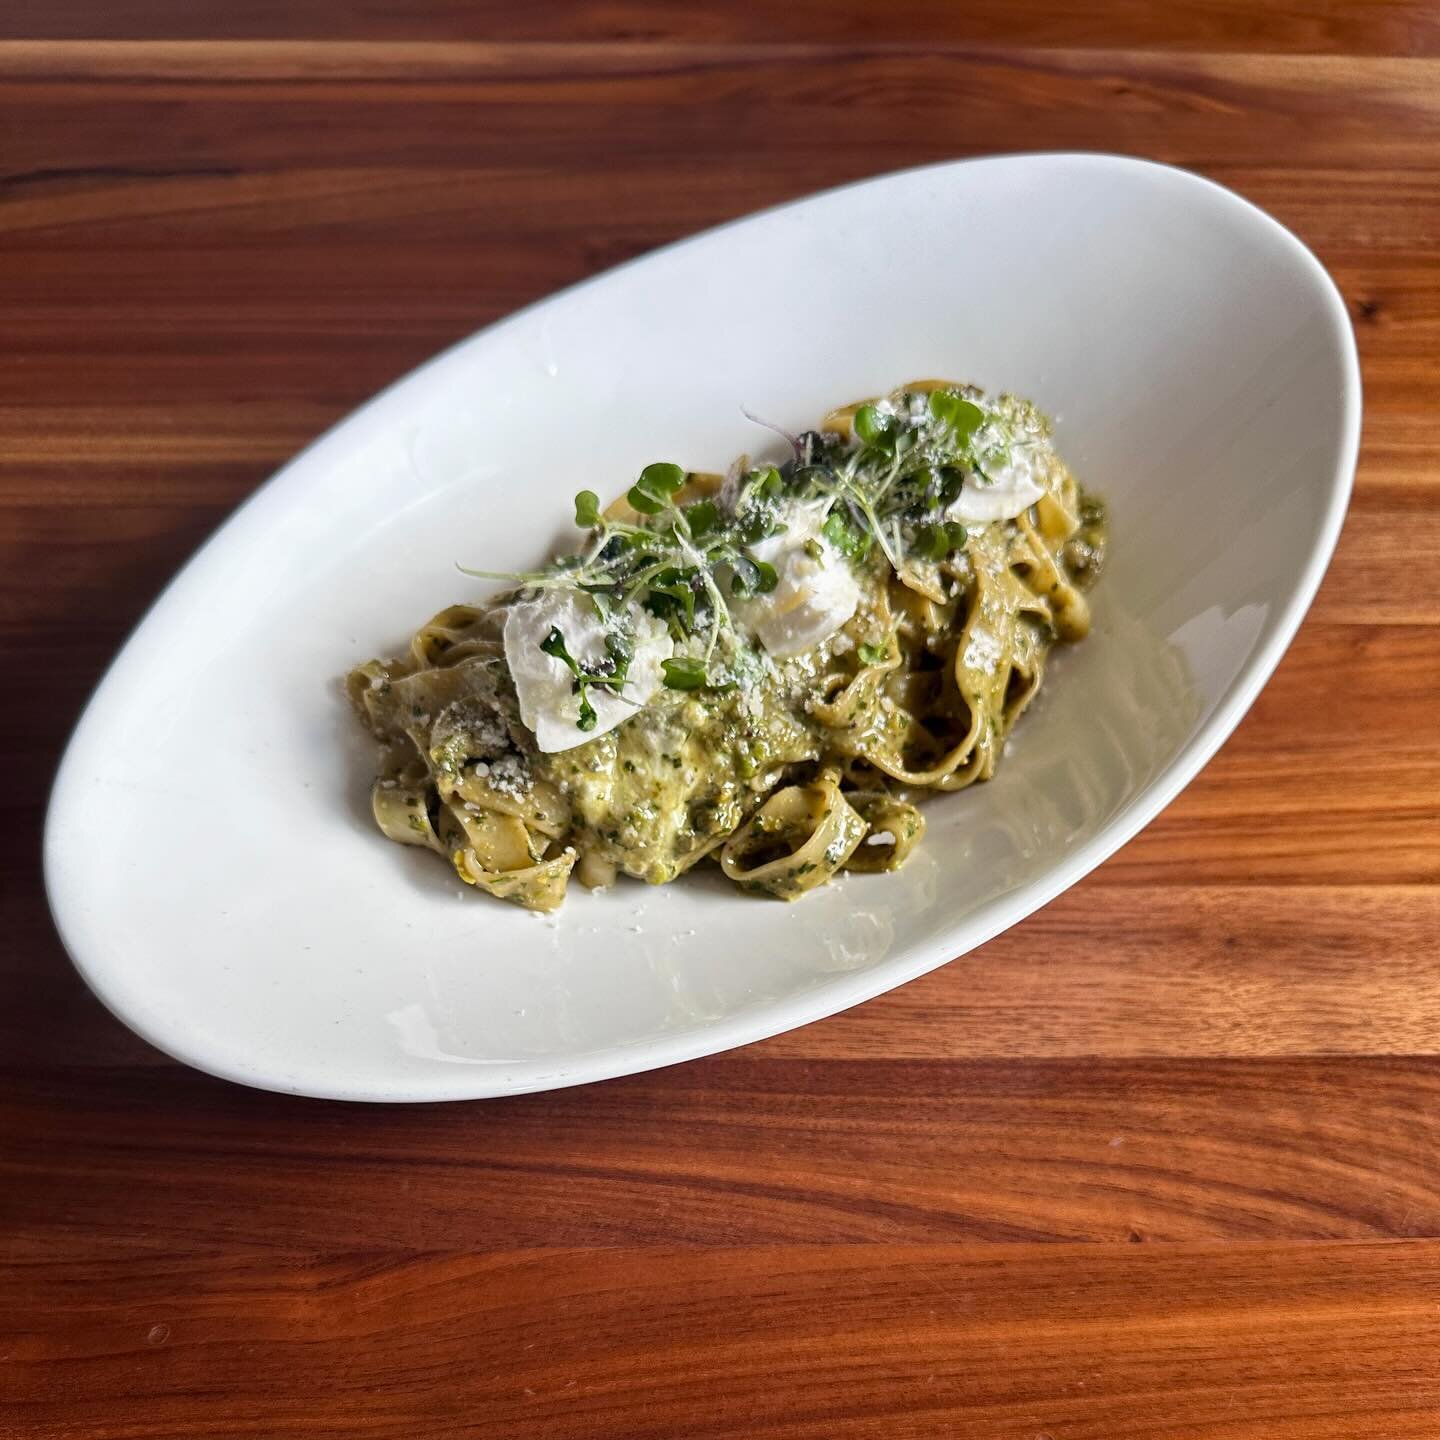 The Pesto Burrata features our house made pesto of pistachios, Parmesan cheese, garlic and fresh basil, topped with chunks of burrata and microgreens. Available with fettuccine or bucatini &ndash; either way it&rsquo;s delicious!